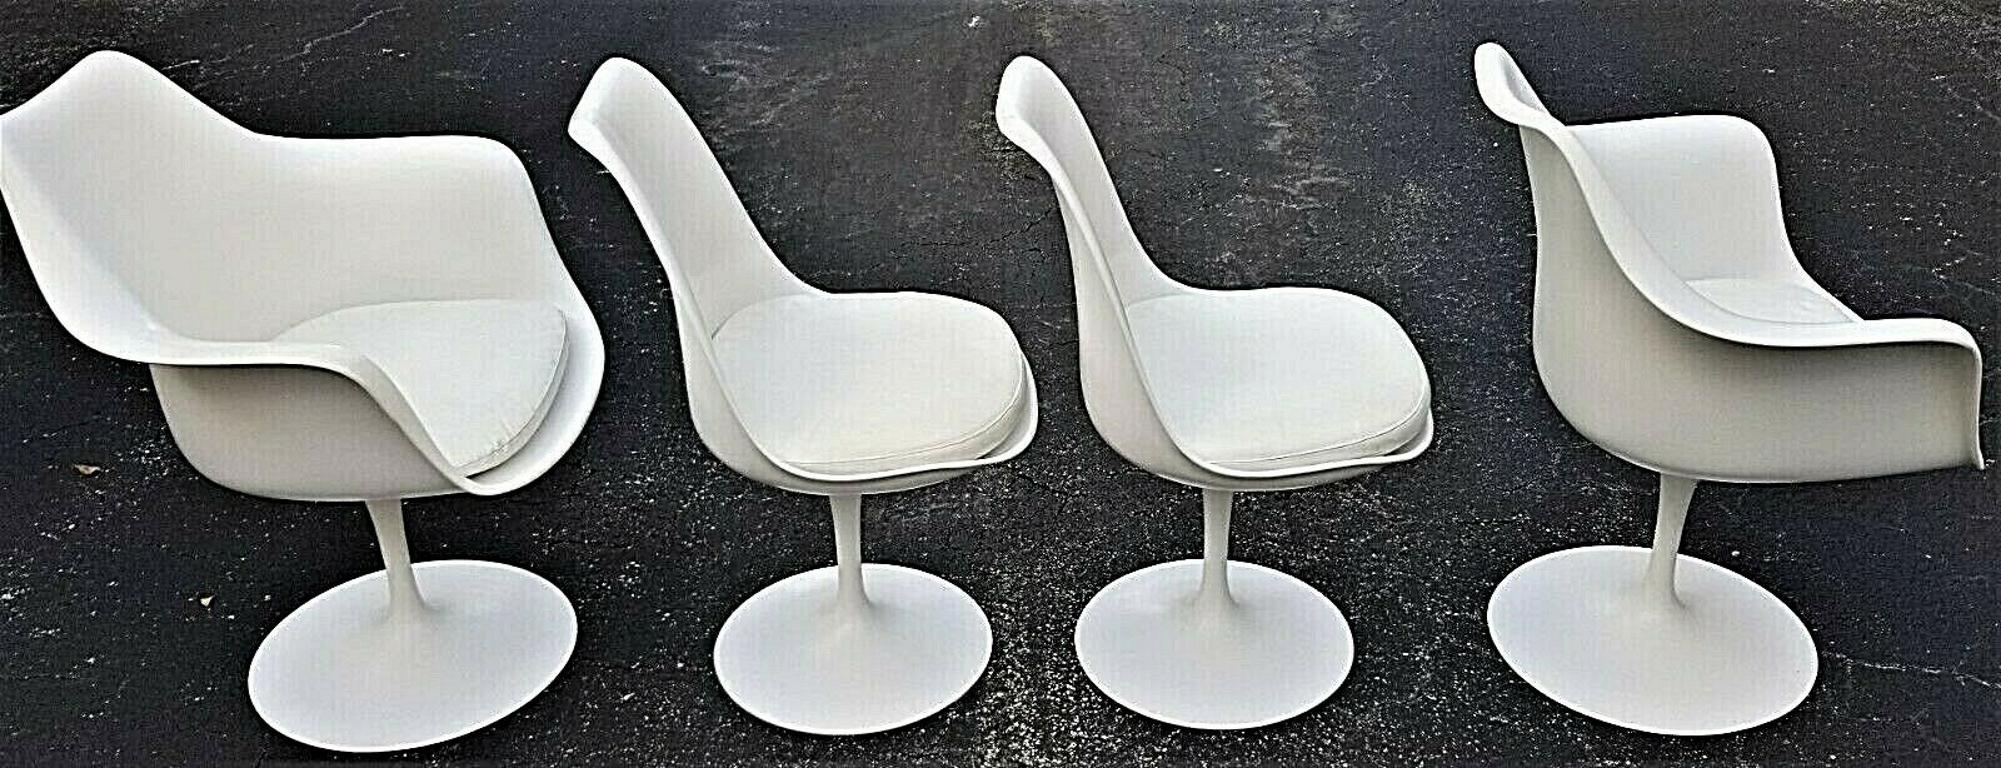 Offering One Of Our Recent Palm Beach Estate Fine Furniture Acquisitions Of An
Authentic 1970's KNOLL EERO SAARINEN Tulip Swivel Dining Chairs - Set of 4

This listing and price are for the 4 chairs only. We also have the matching table available